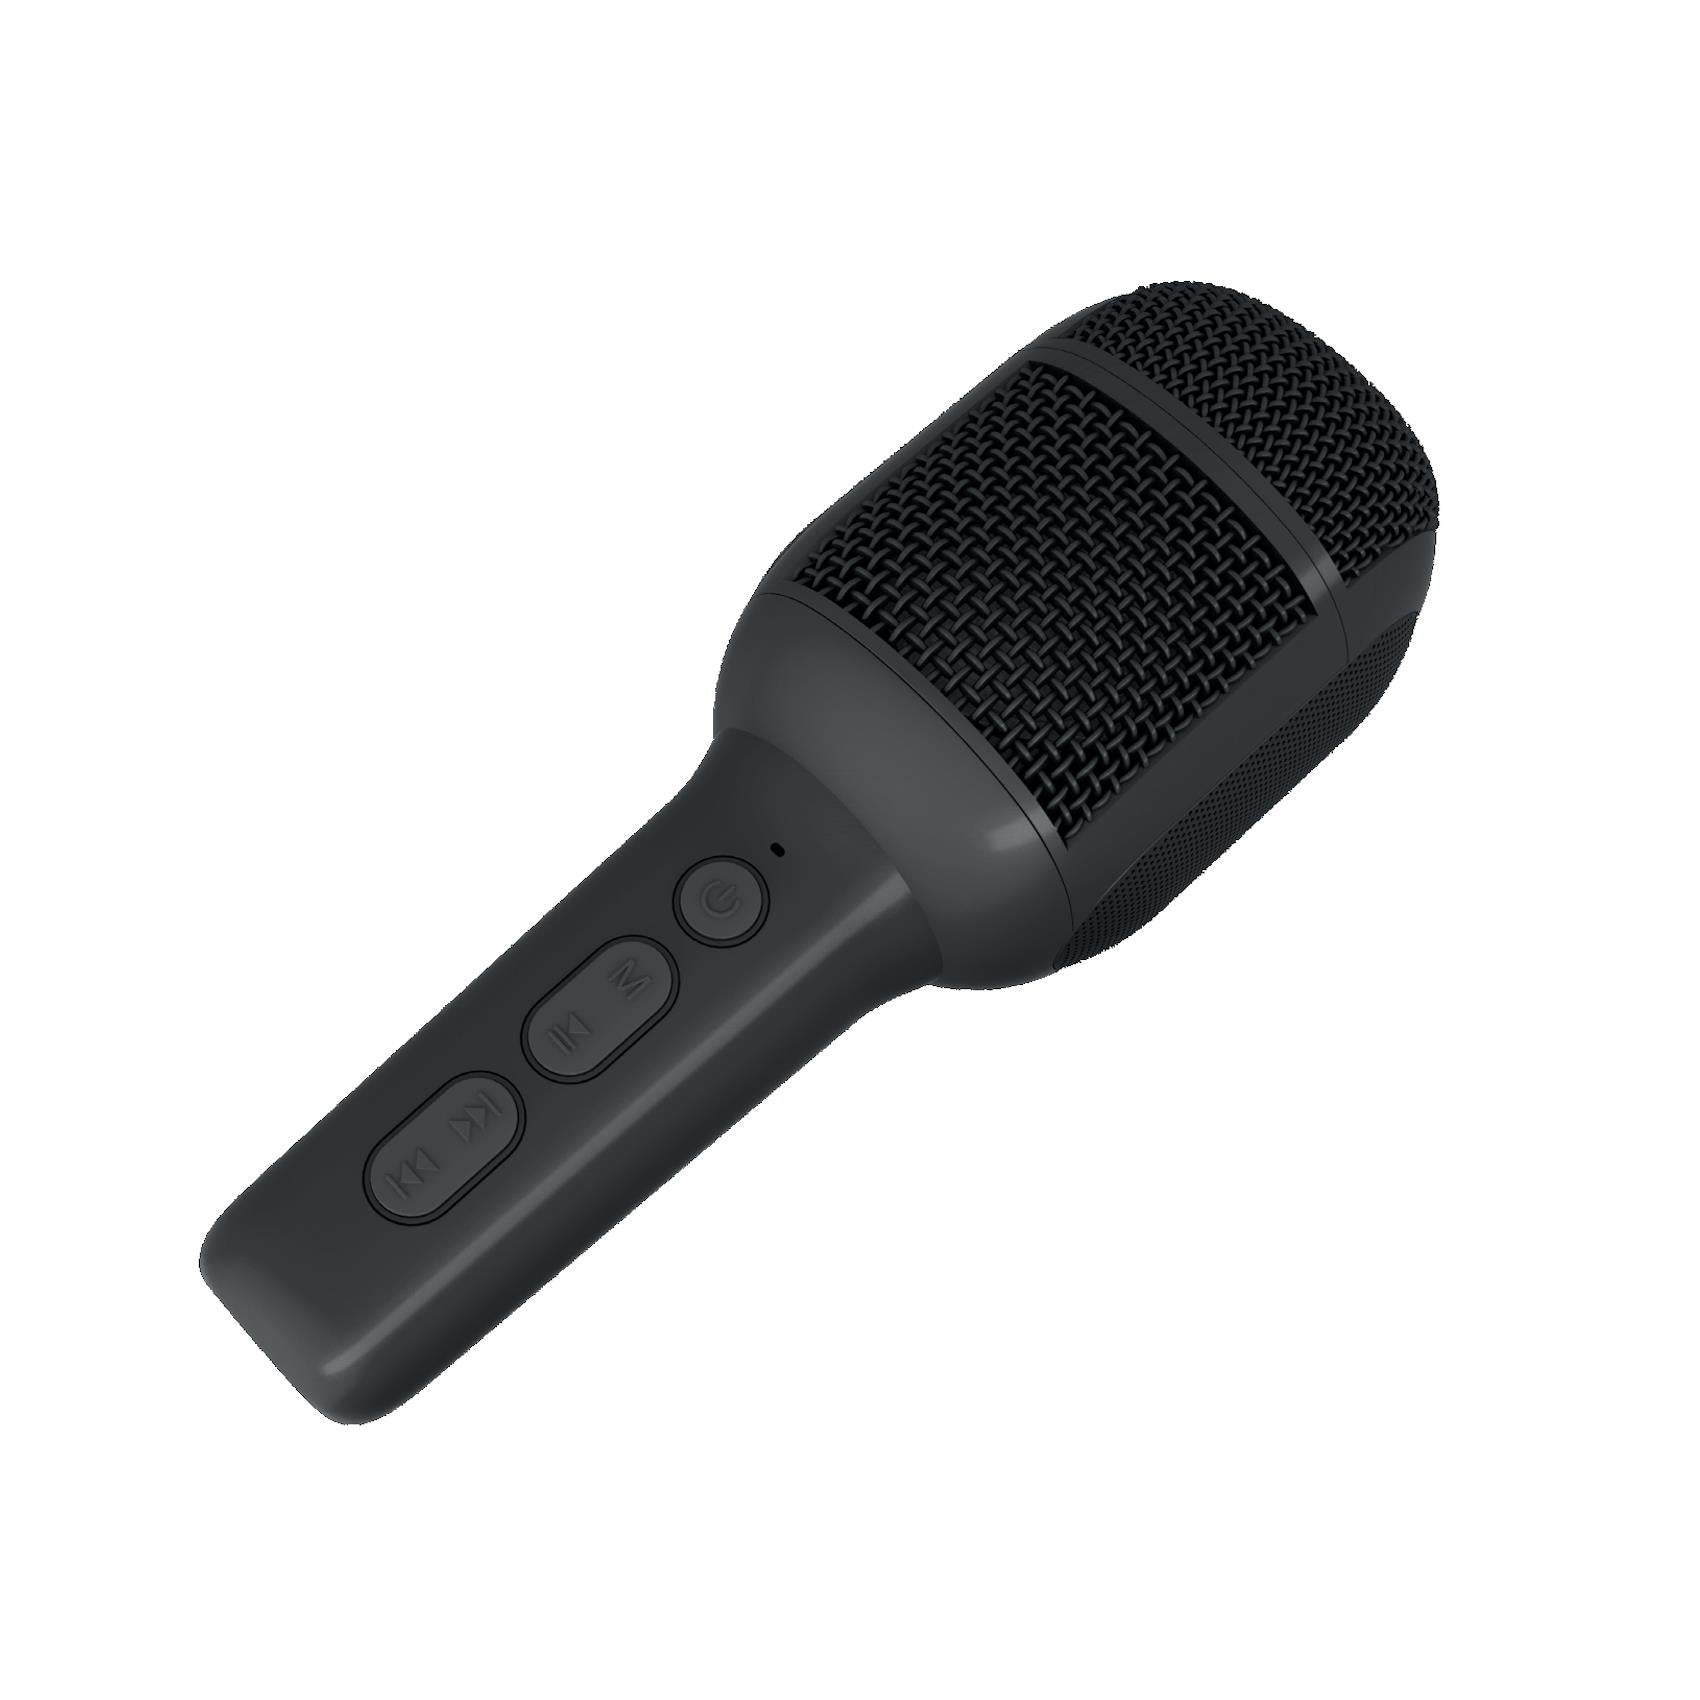 Celly KIDSFESTIVAL2 - Wireless Microphone with Built-in Speaker Black